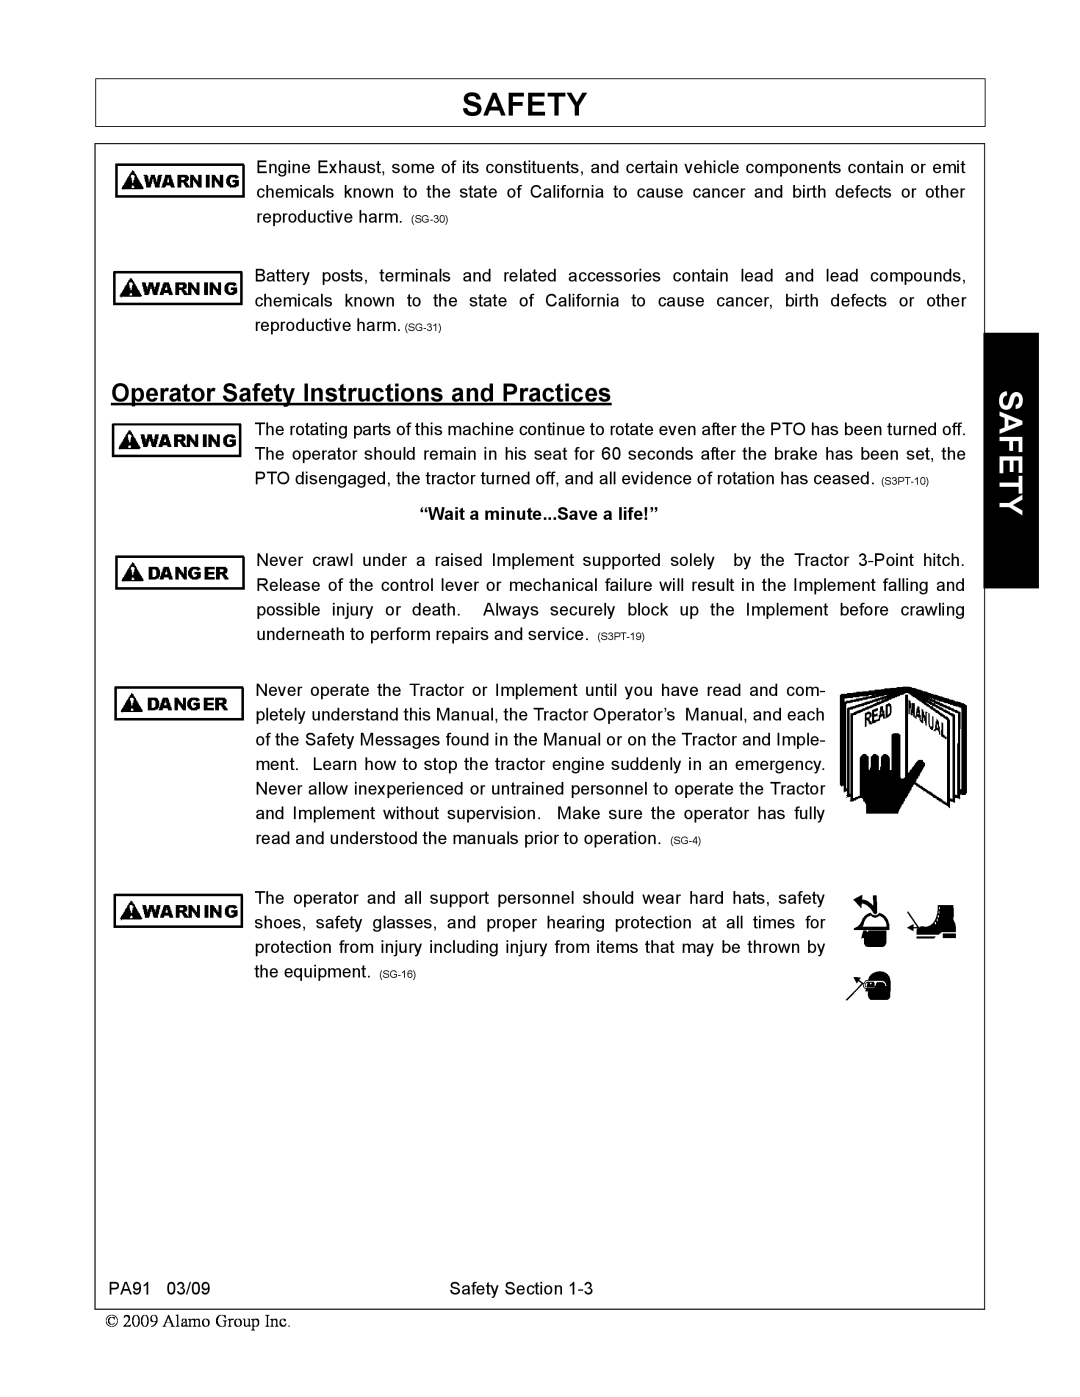 Alamo 7191852C manual Operator Safety Instructions and Practices, “Wait a minute...Save a life!” 